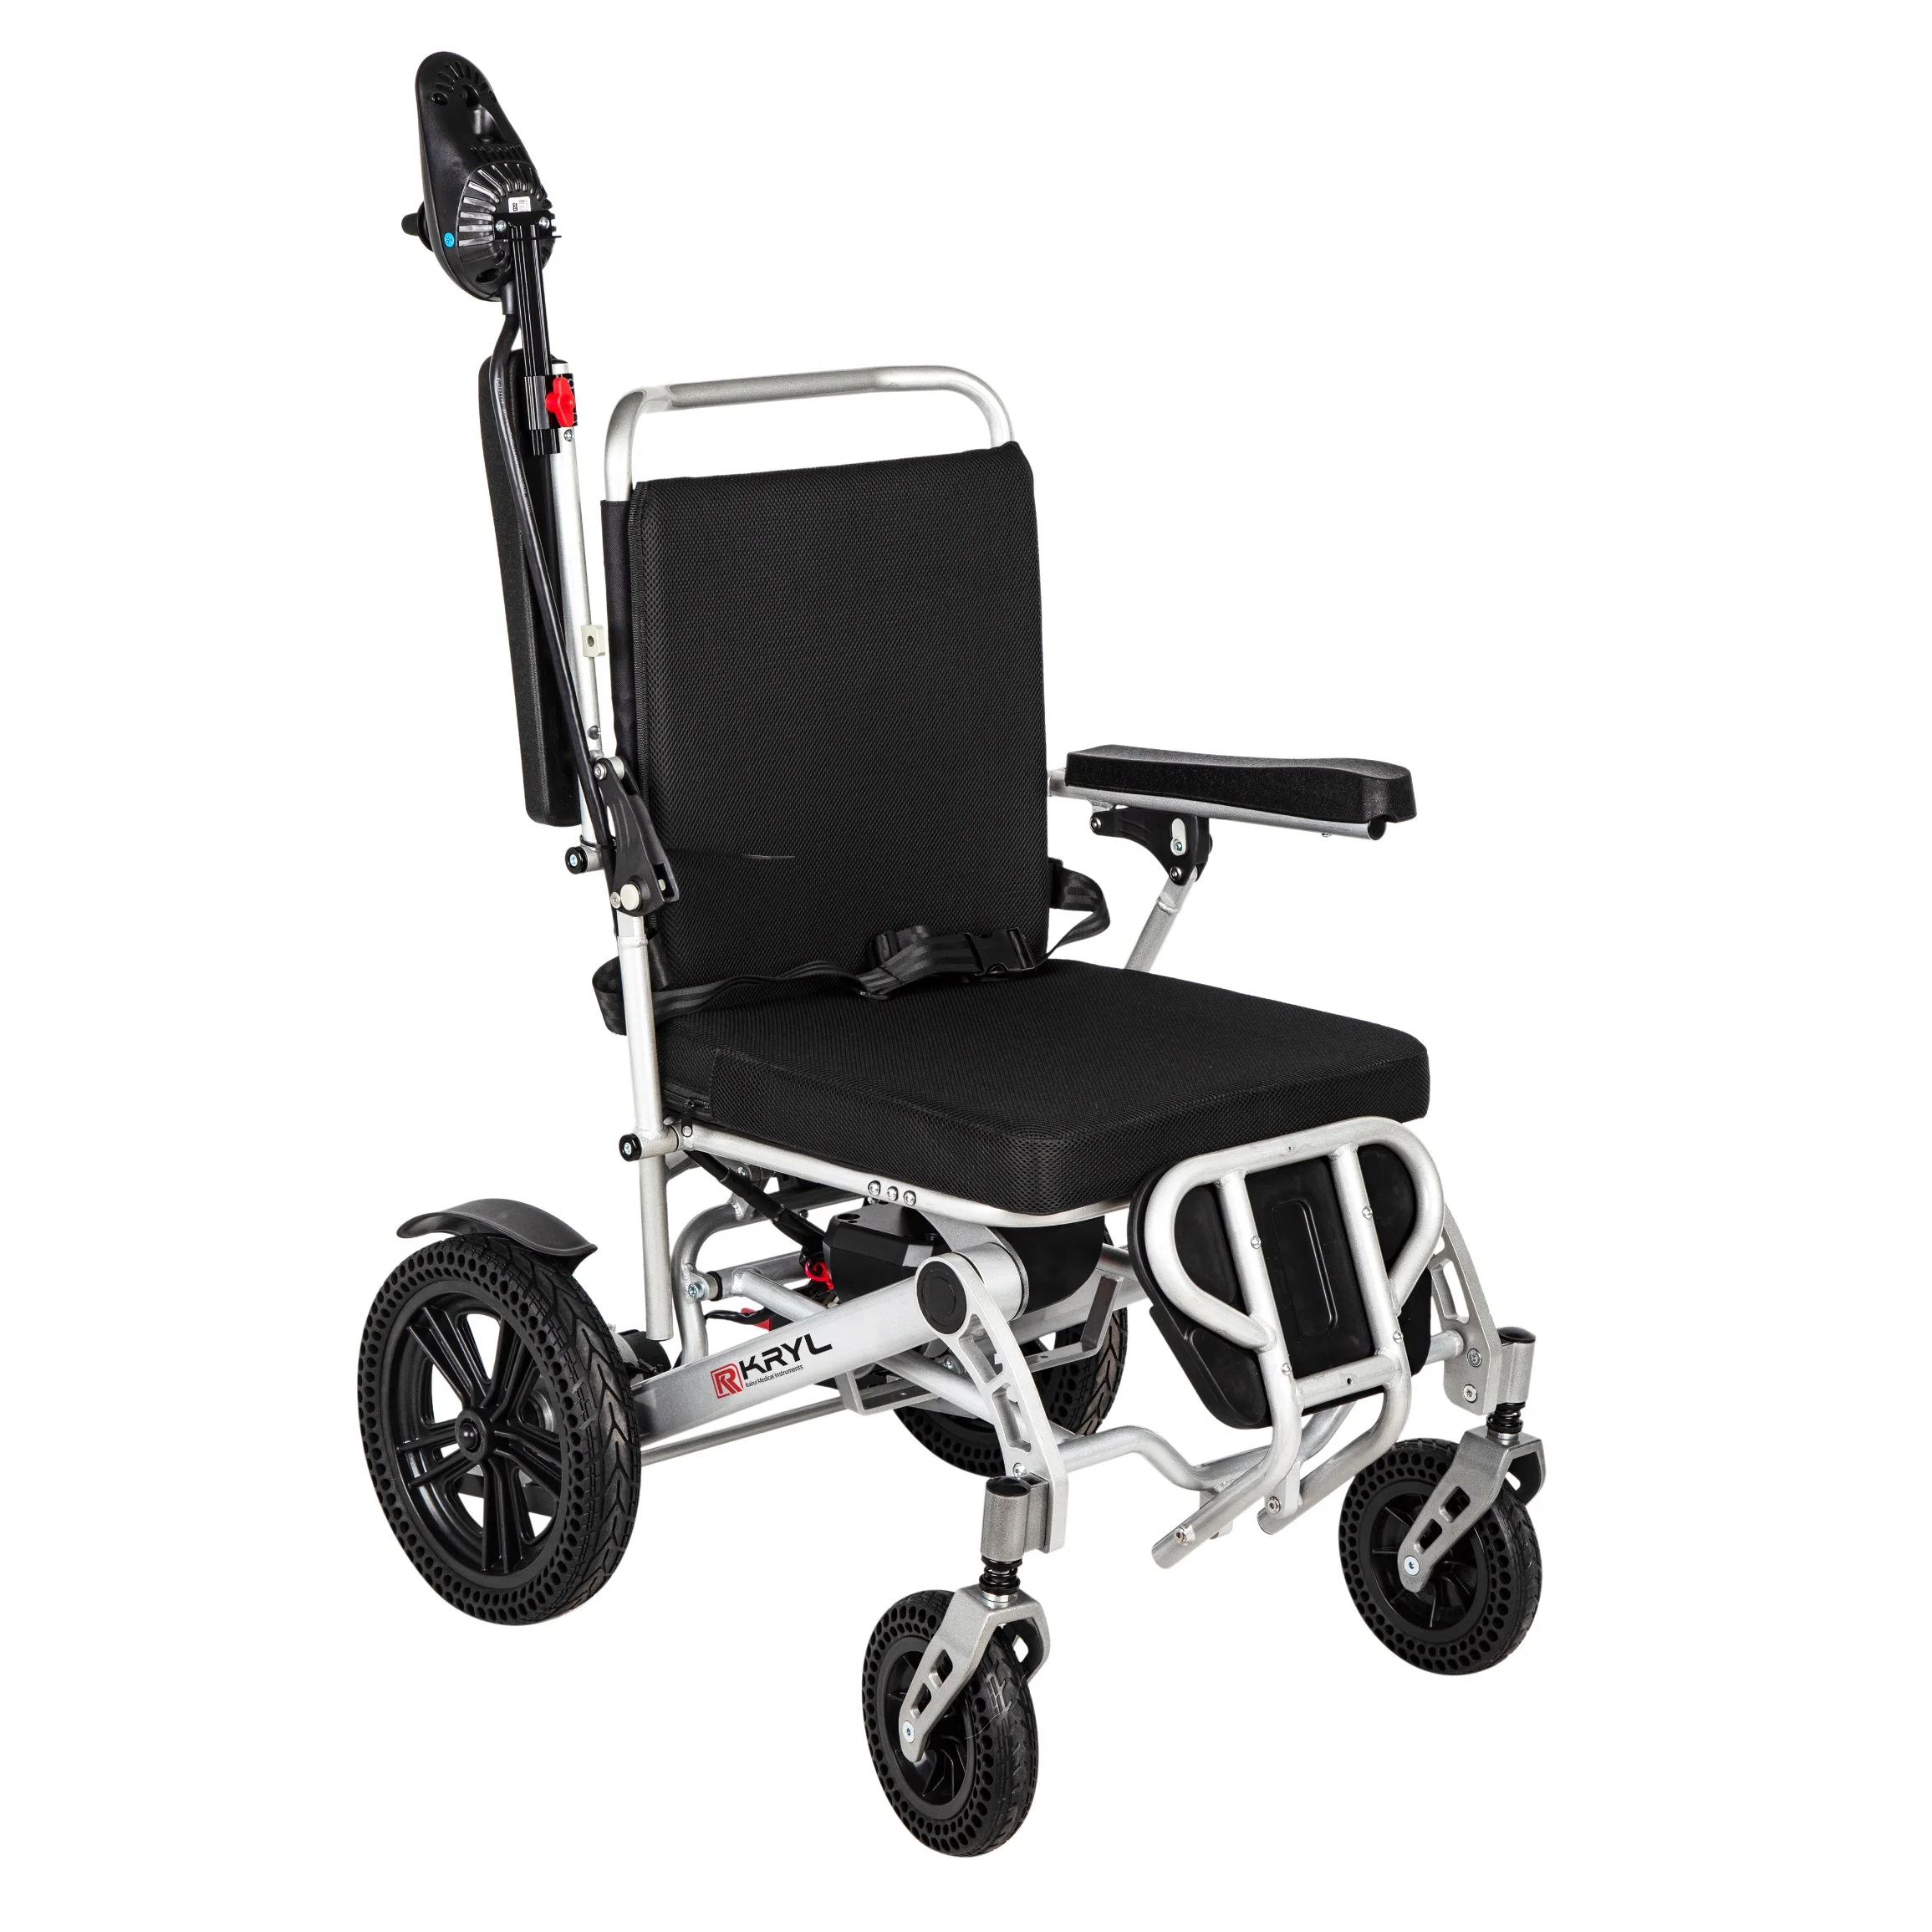 Elderly Electric 4 Wheel Disabled Handicap Folding Foldable Mobility Scooters and Wheelchairs Disabled Scooter